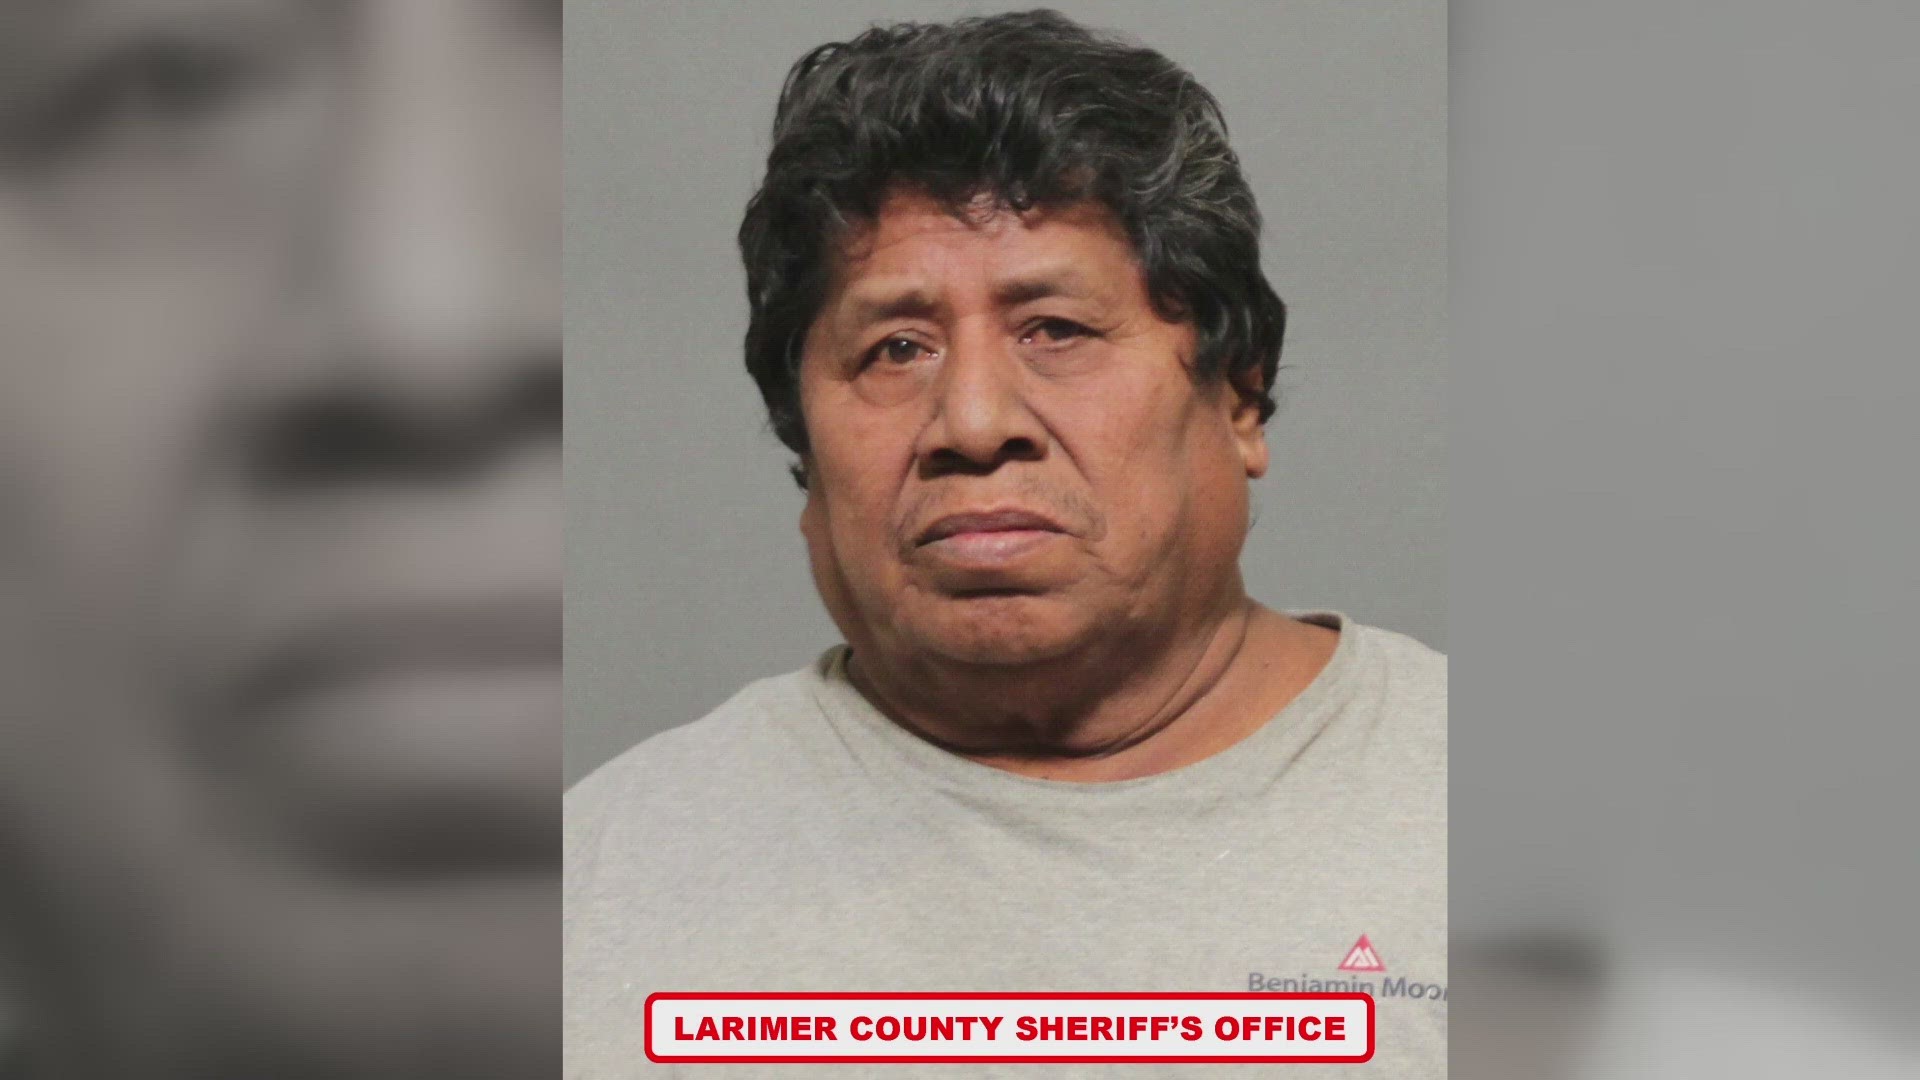 At least three victims have come forward saying that Hipolito Gomez-Perdomo abused them, according to the Larimer County Sheriff's Office.